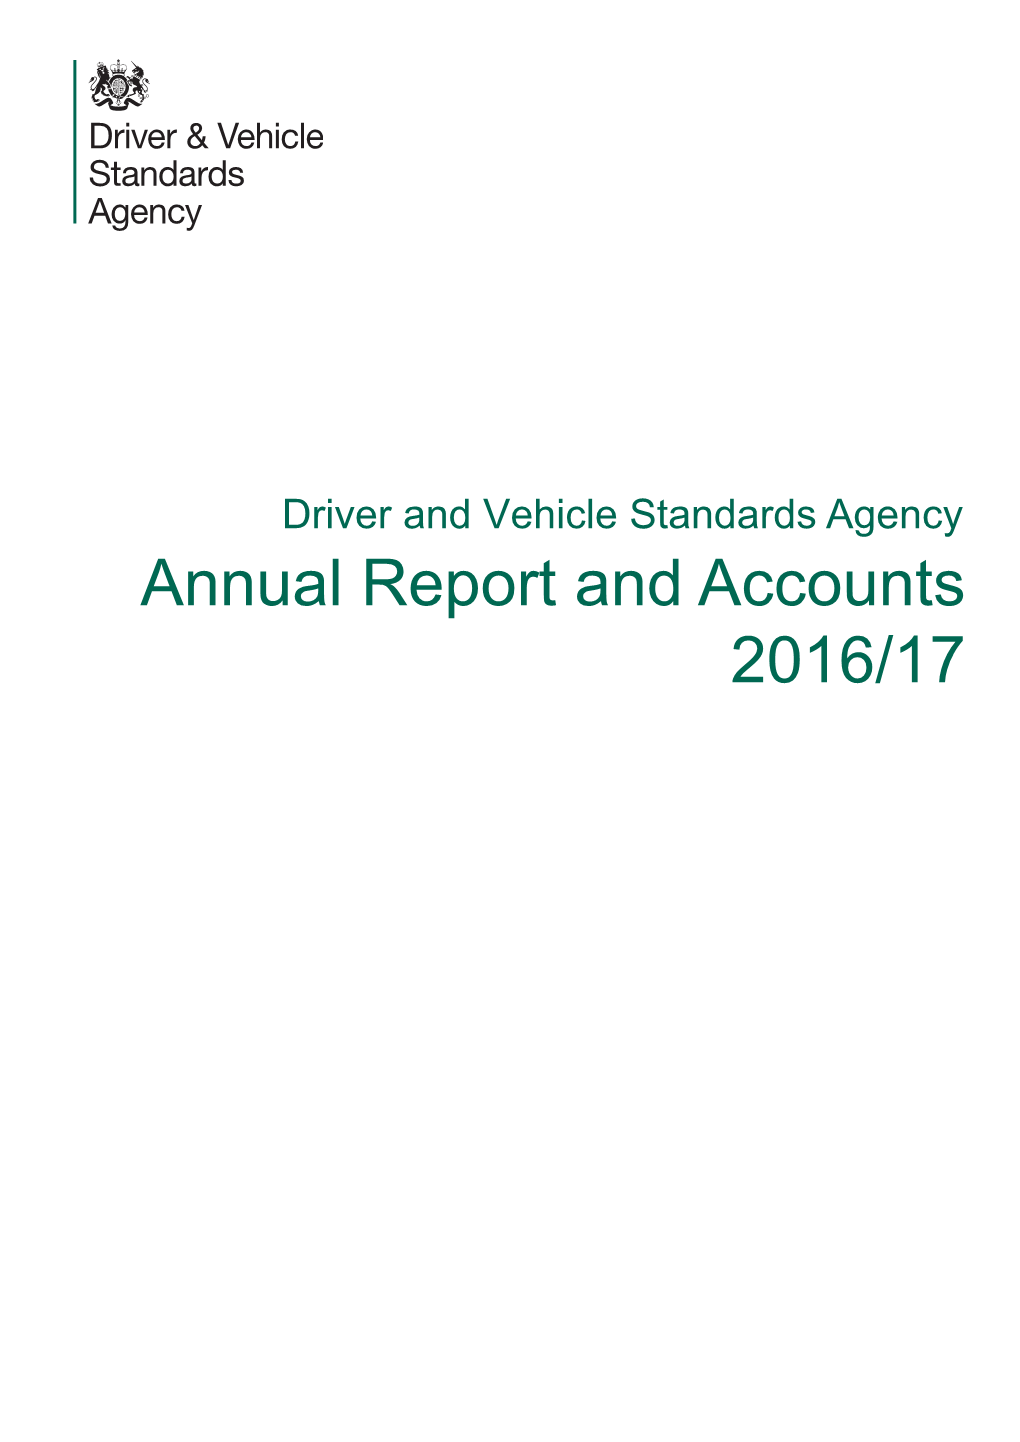 DVSA Annual Report and Accounts, 2016 to 2017